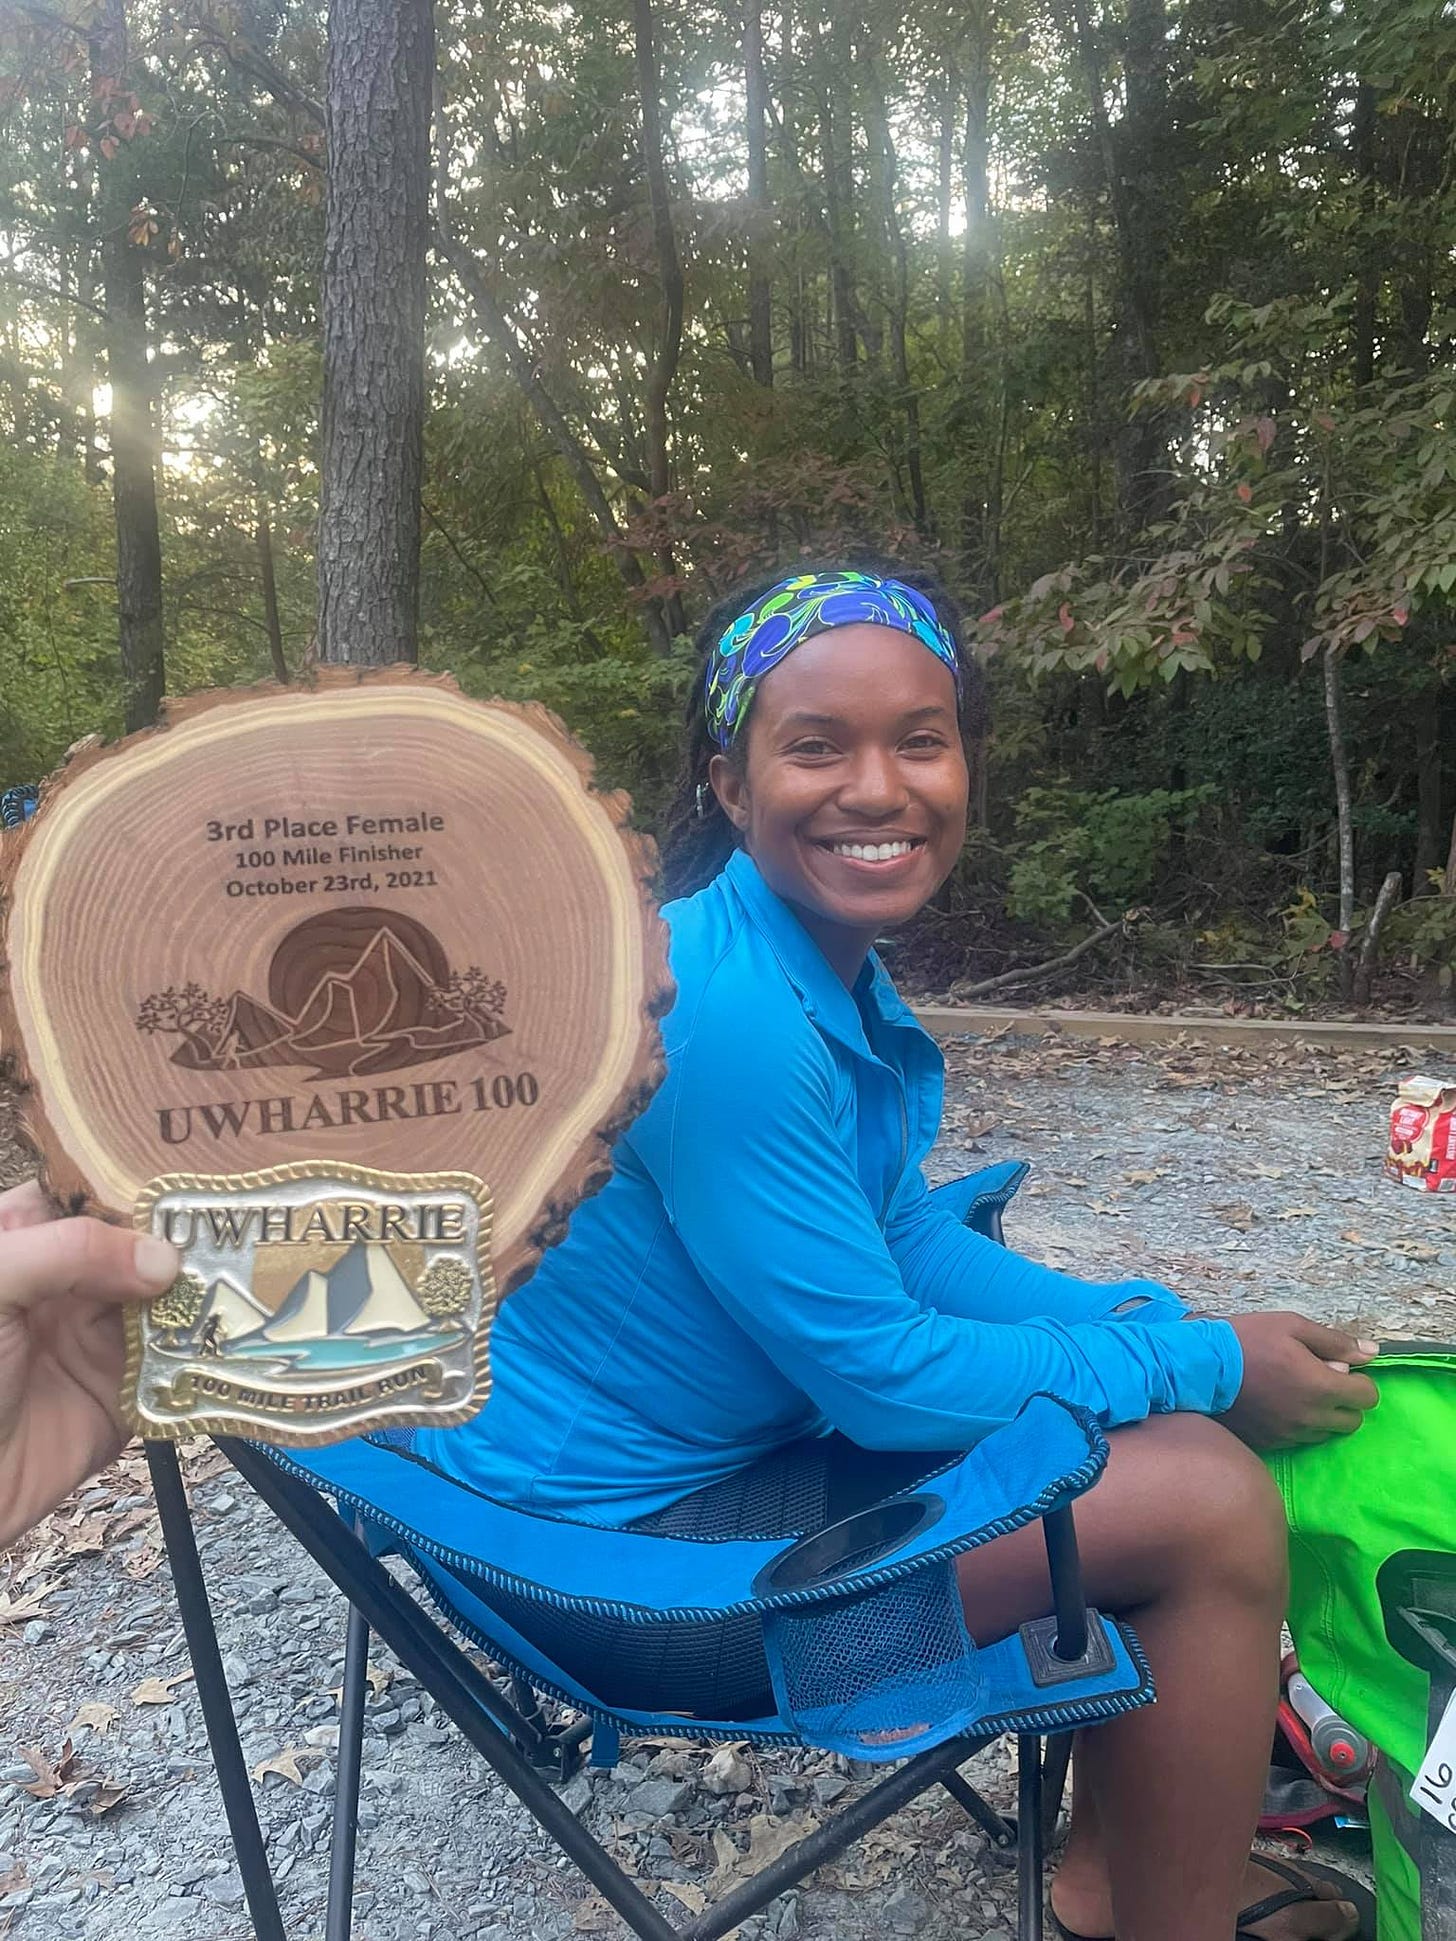 May be an image of one or more people, outdoors and text that says '3rd Place Female 100 Mile Finisher October 3rd, 2021 UWHARRIE100 UWHARRIE'